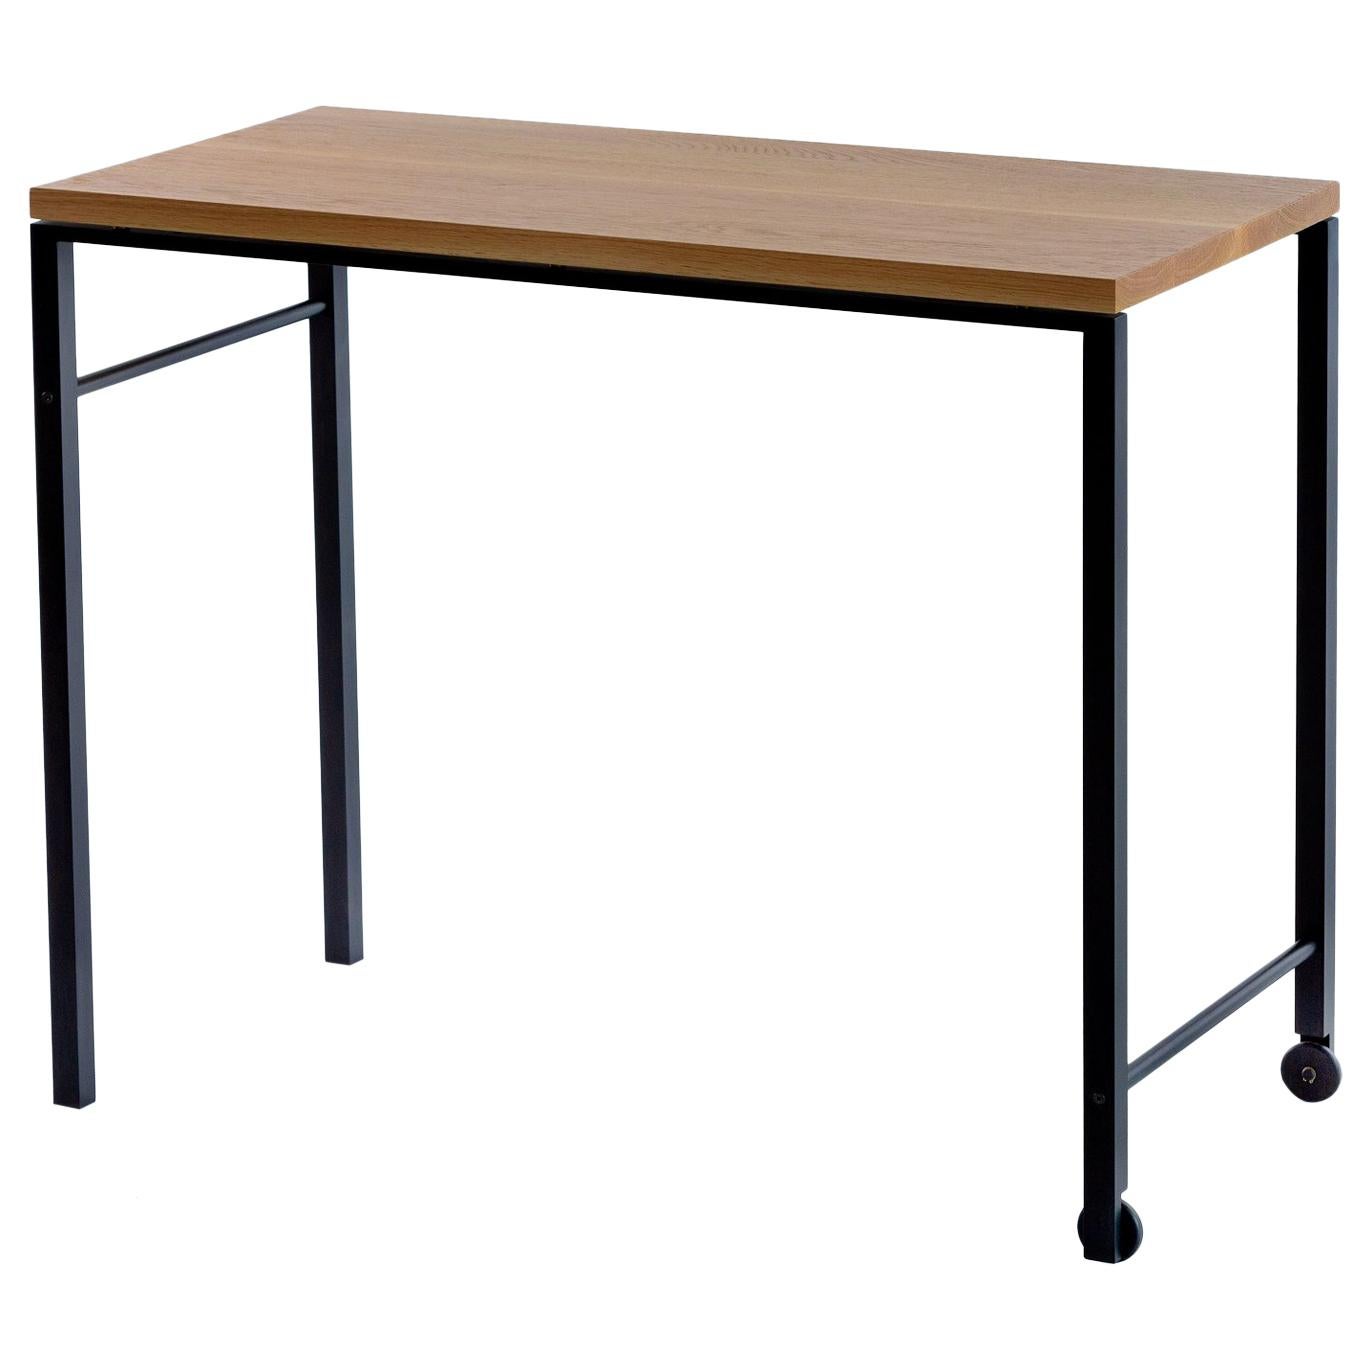 AT16 White Oak Writing Desk, Occasional Table, with Blackened Steel and Castors